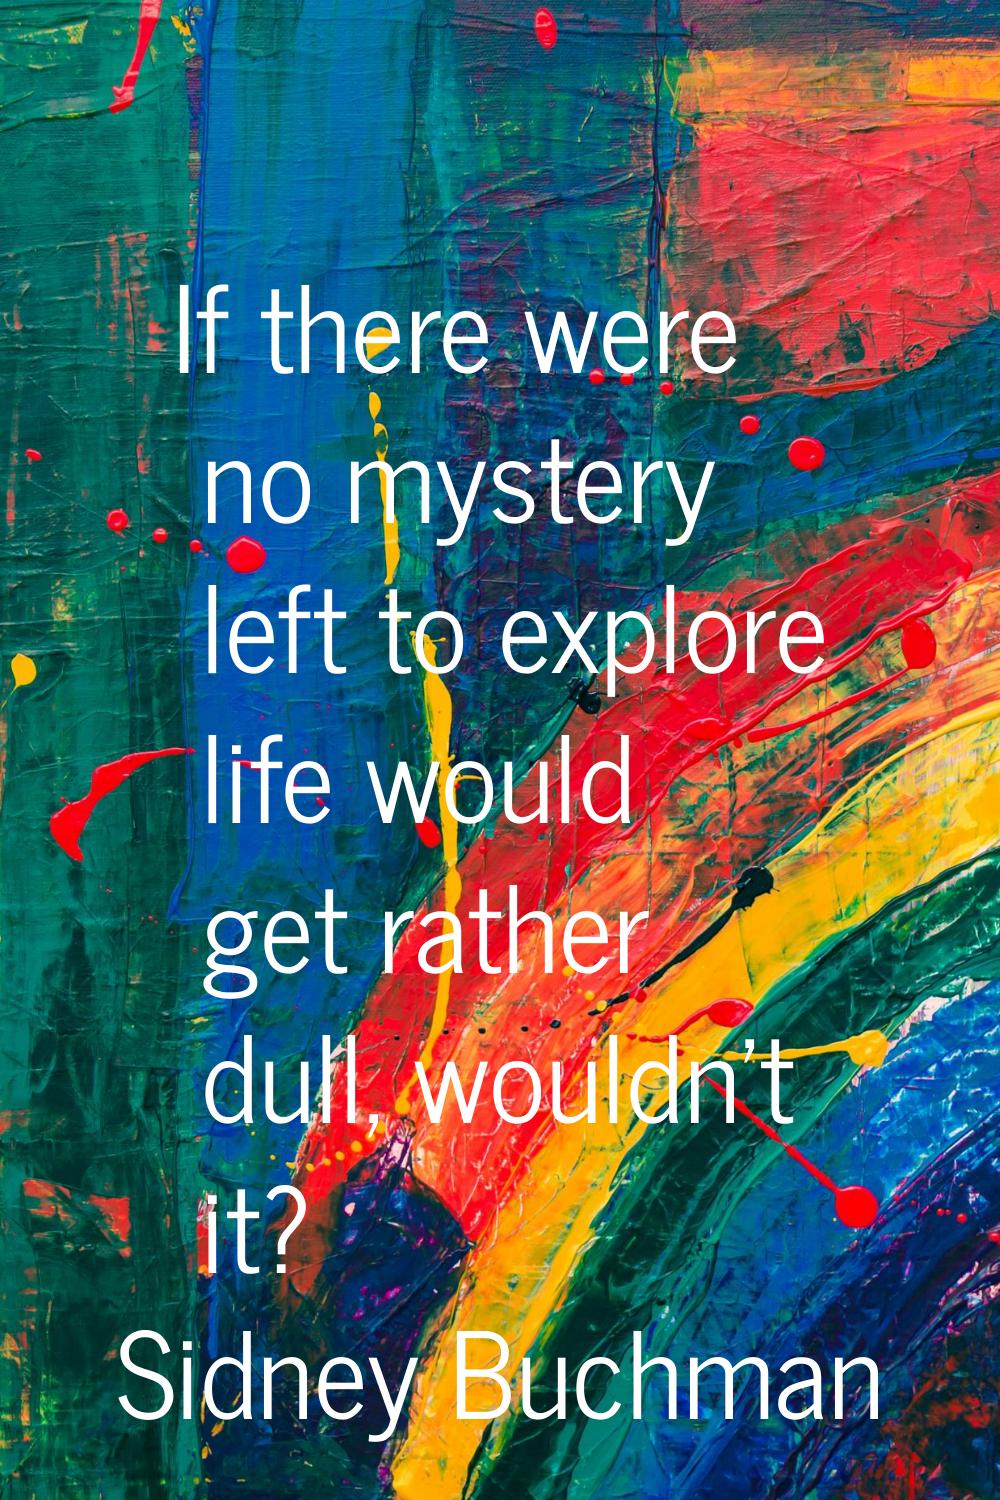 If there were no mystery left to explore life would get rather dull, wouldn't it?